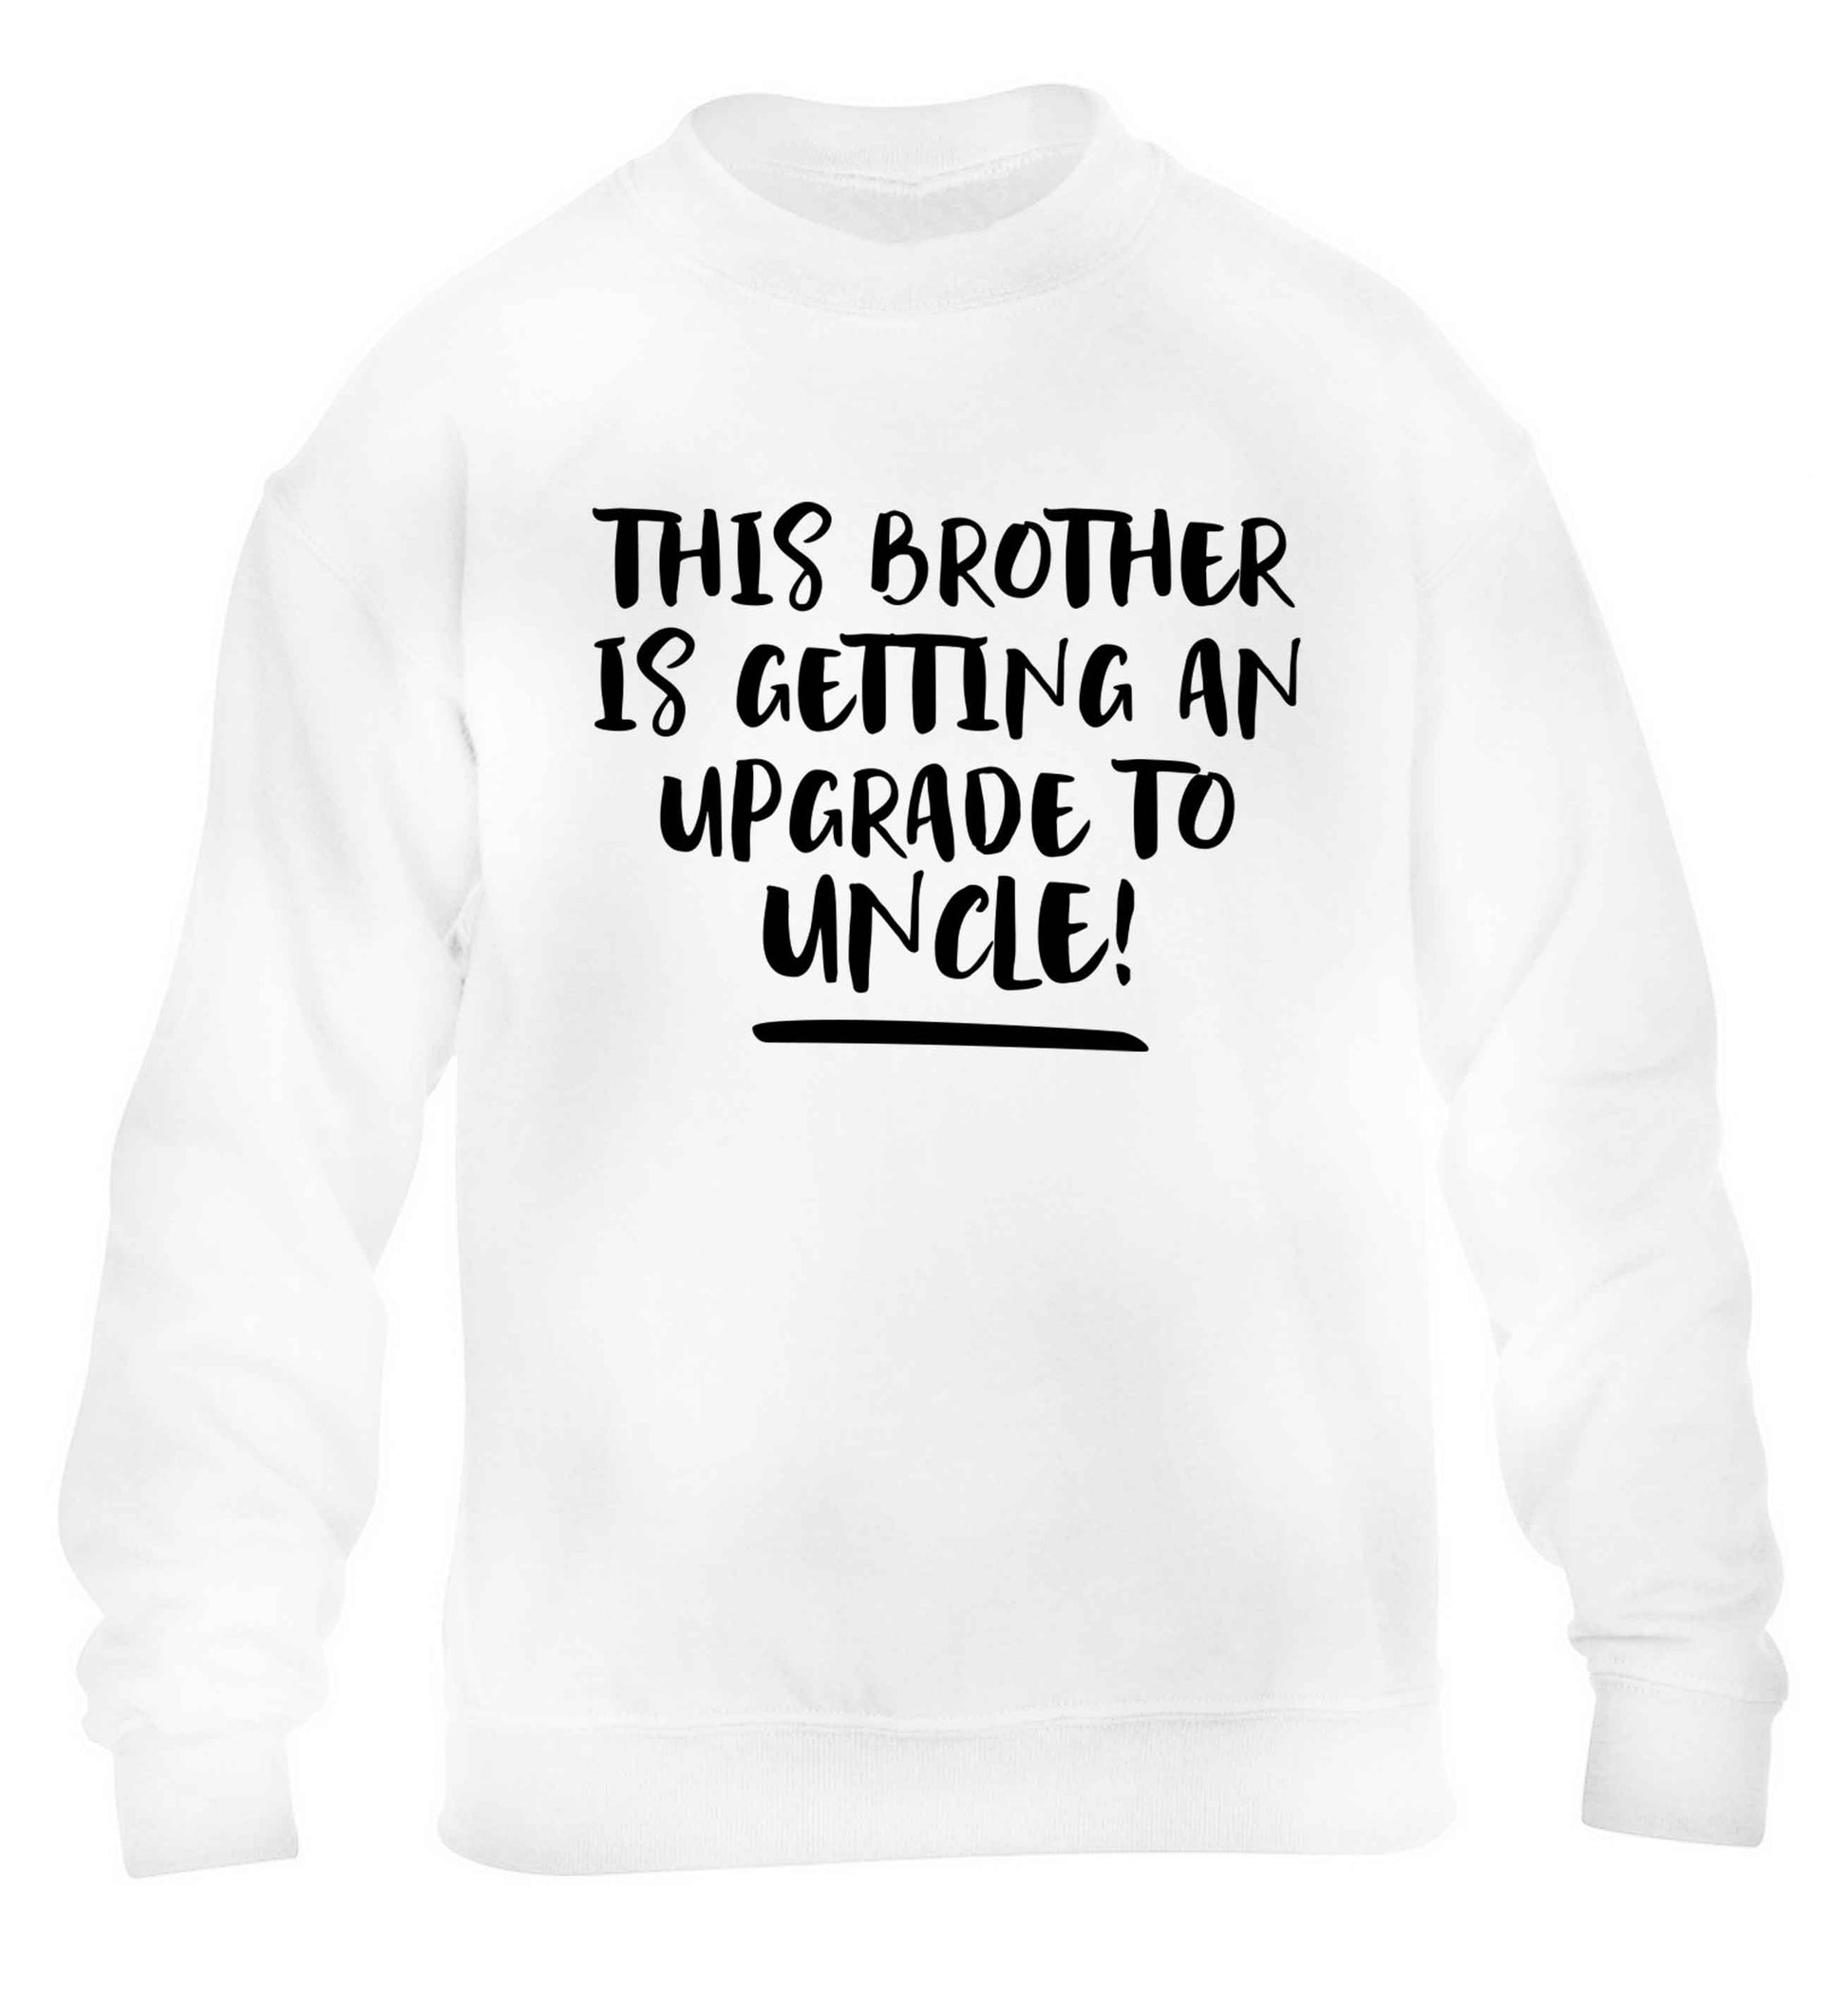 This brother is getting an upgrade to uncle! children's white sweater 12-13 Years